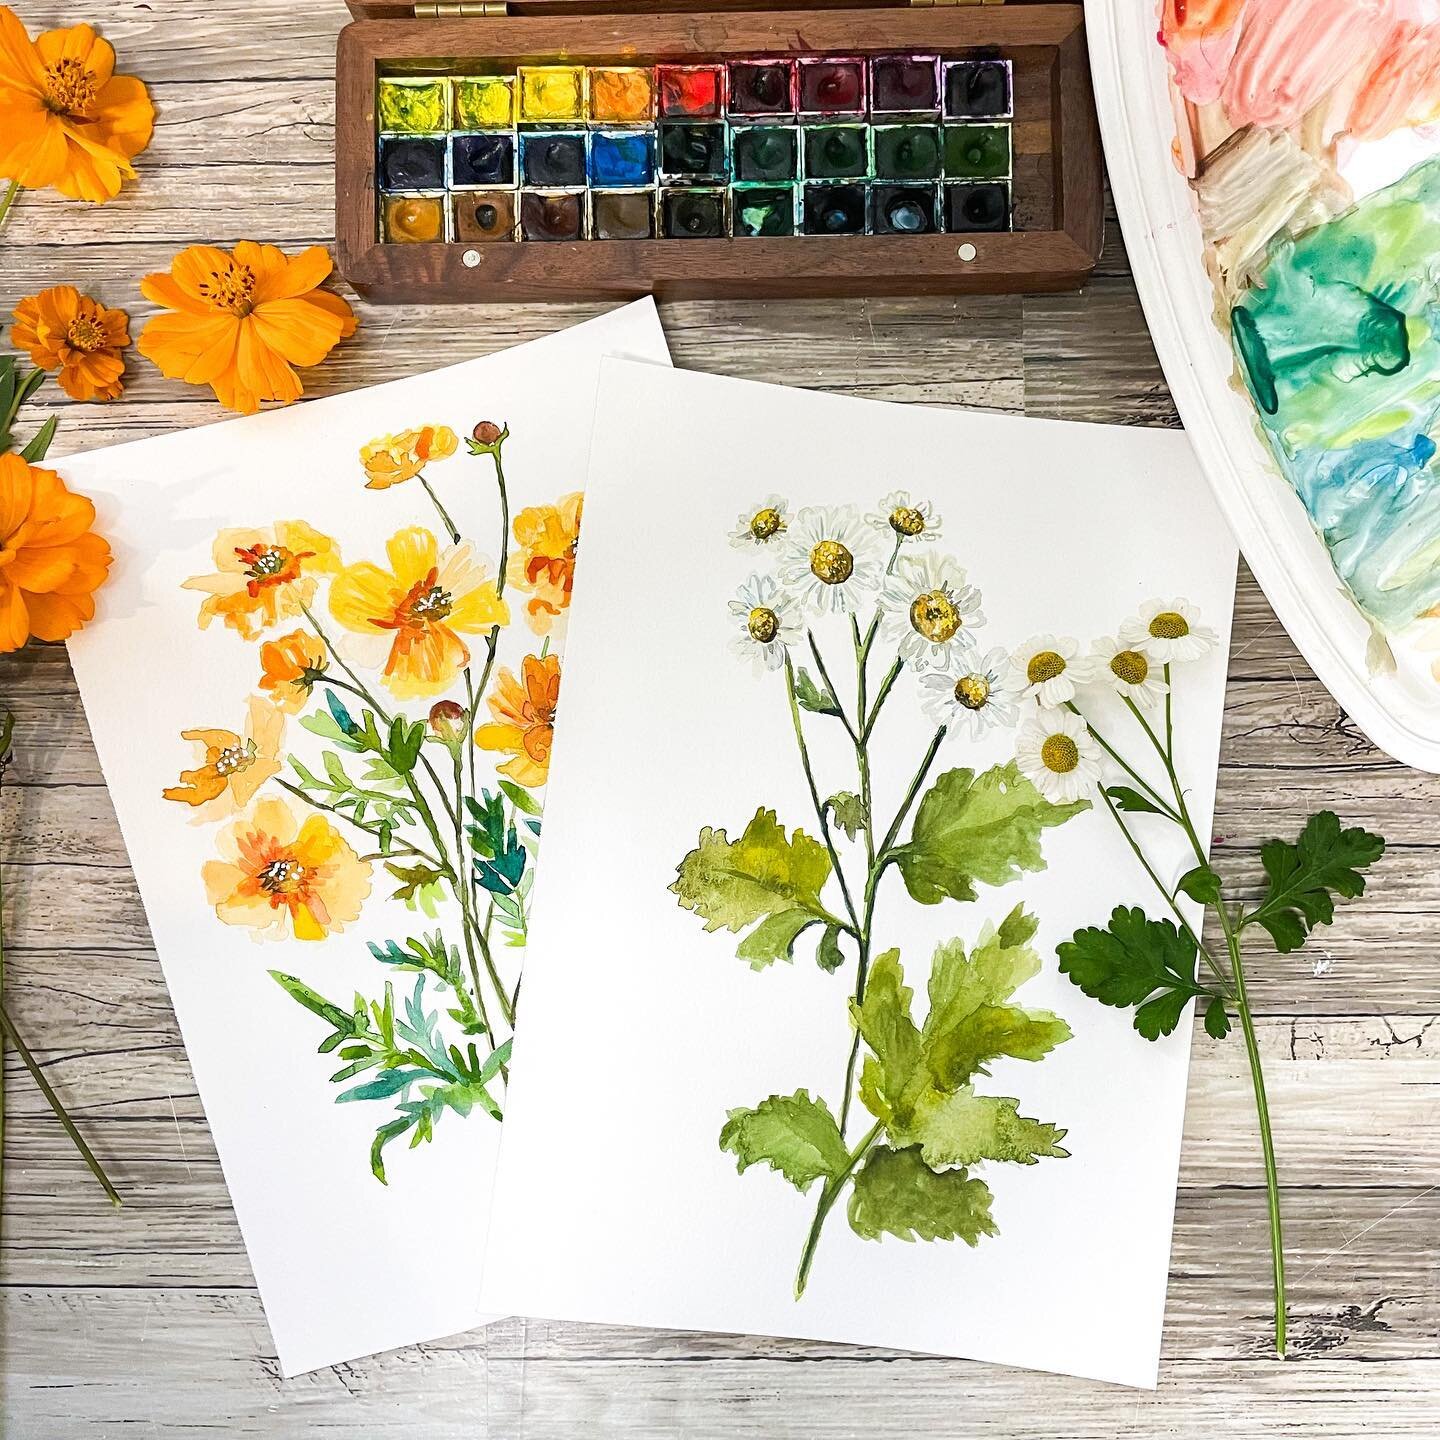 Cosmos and Feverfew, both from my garden. Everything will continue to bloom until first frost, so I&rsquo;m getting my samples now. #feverfew #feverfewflowers #cosmos #cosmosflower #cosmosflowers #gardenflowers #floralart #floralillustration #waterco